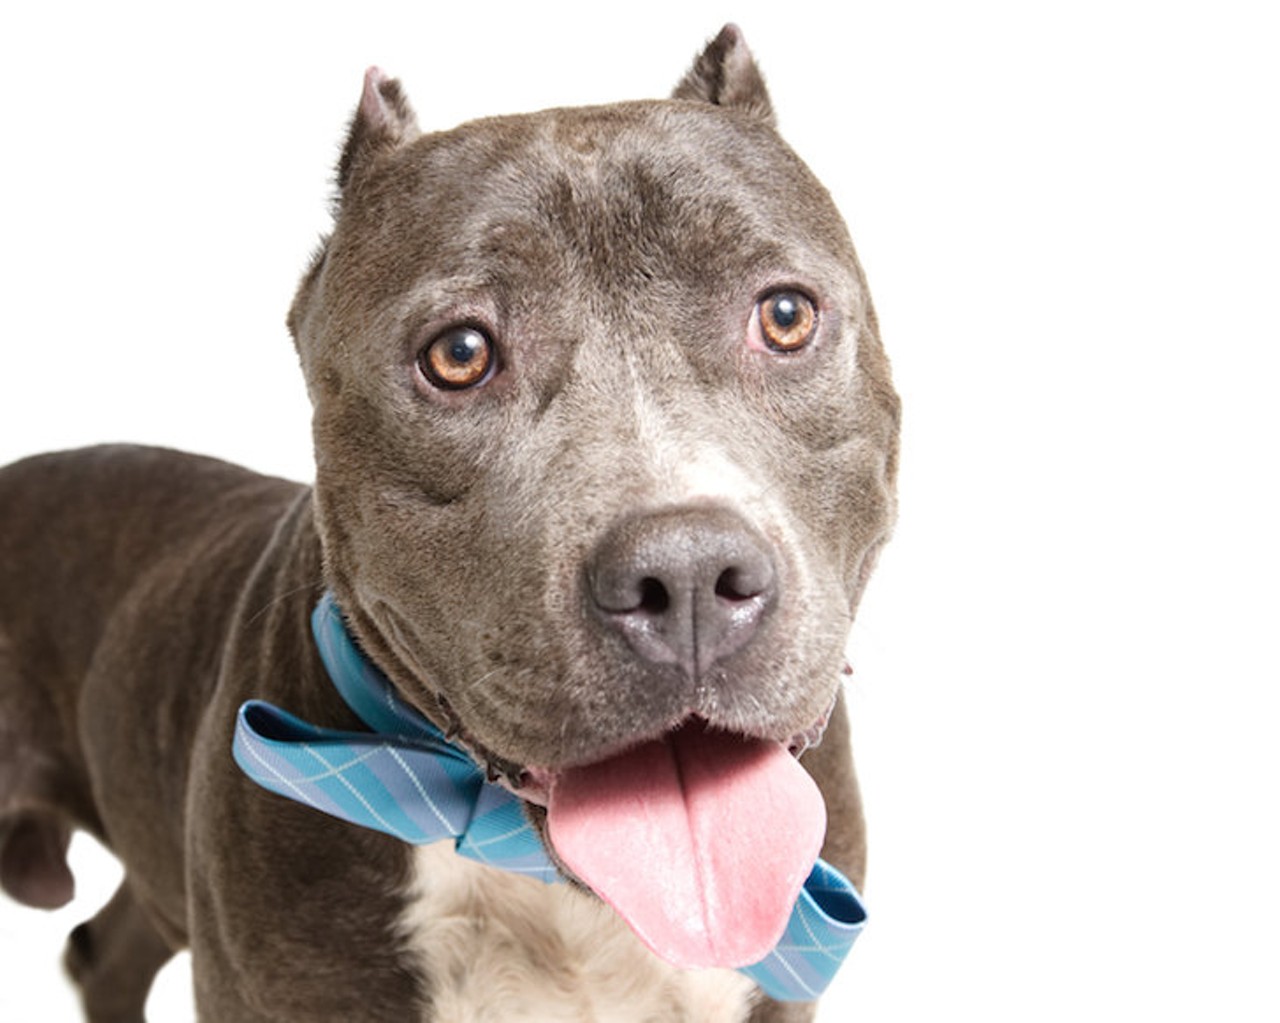 25 adoptable dogs waiting to meet you at Orange County Animal Services